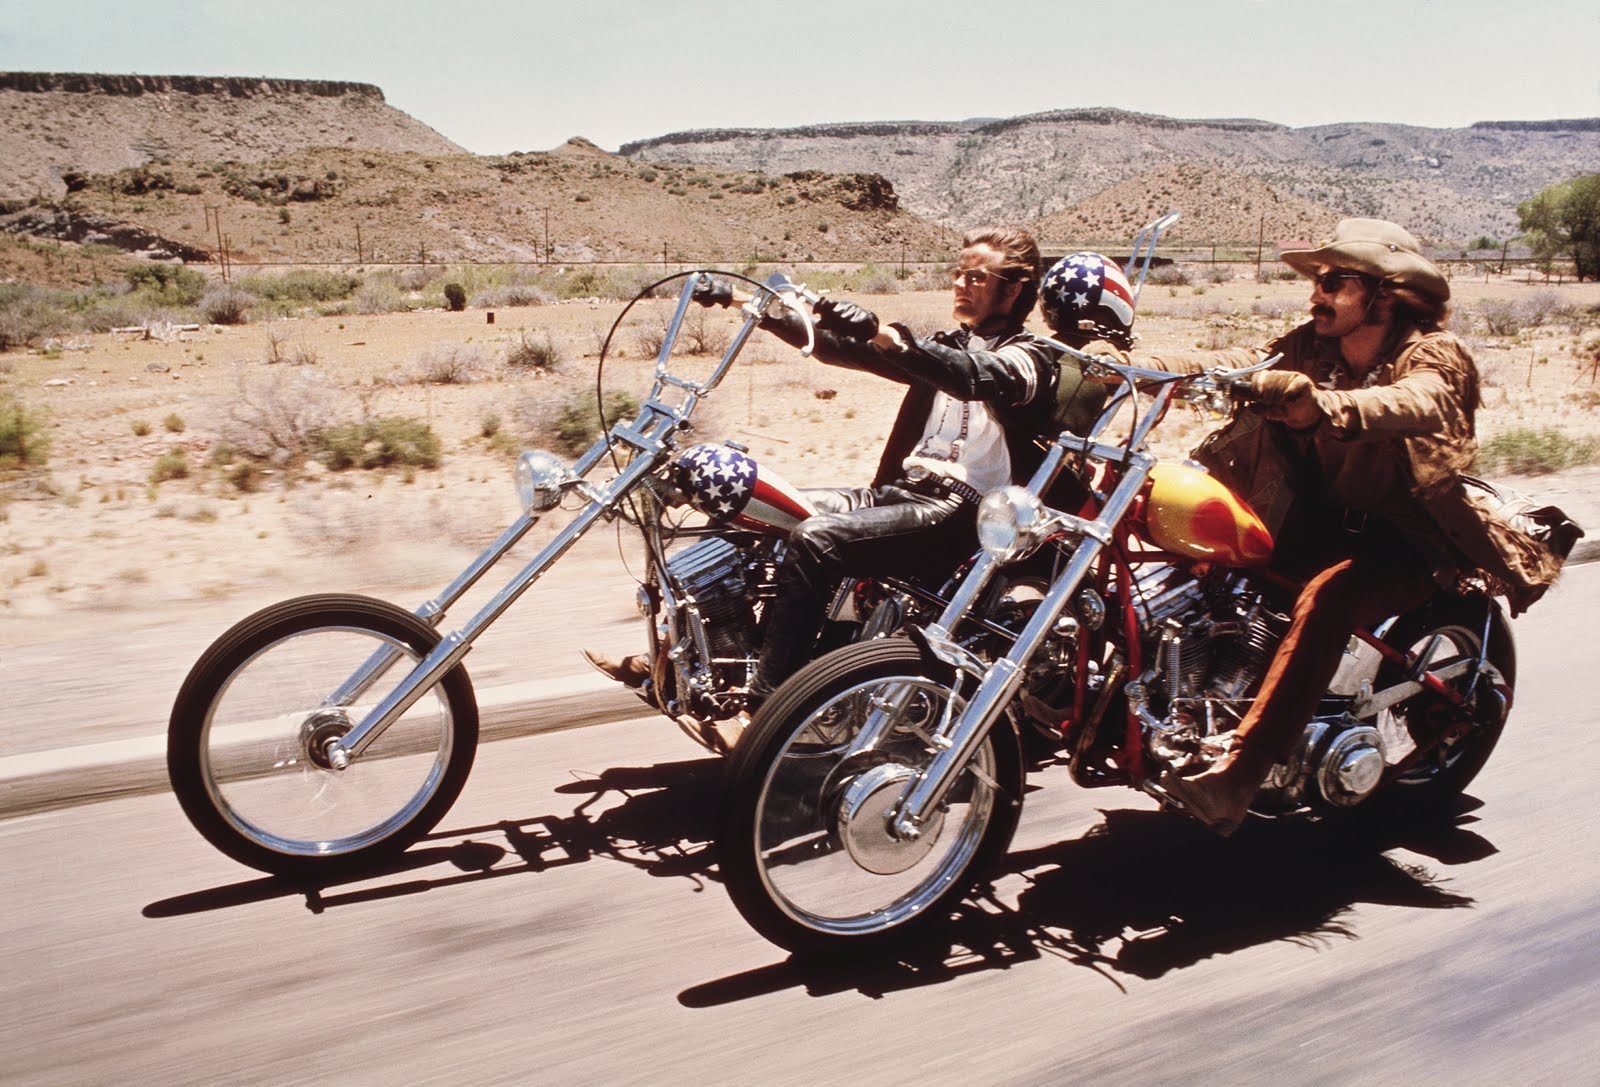 the cast of EAsy Rider on their motorcycles in the desert